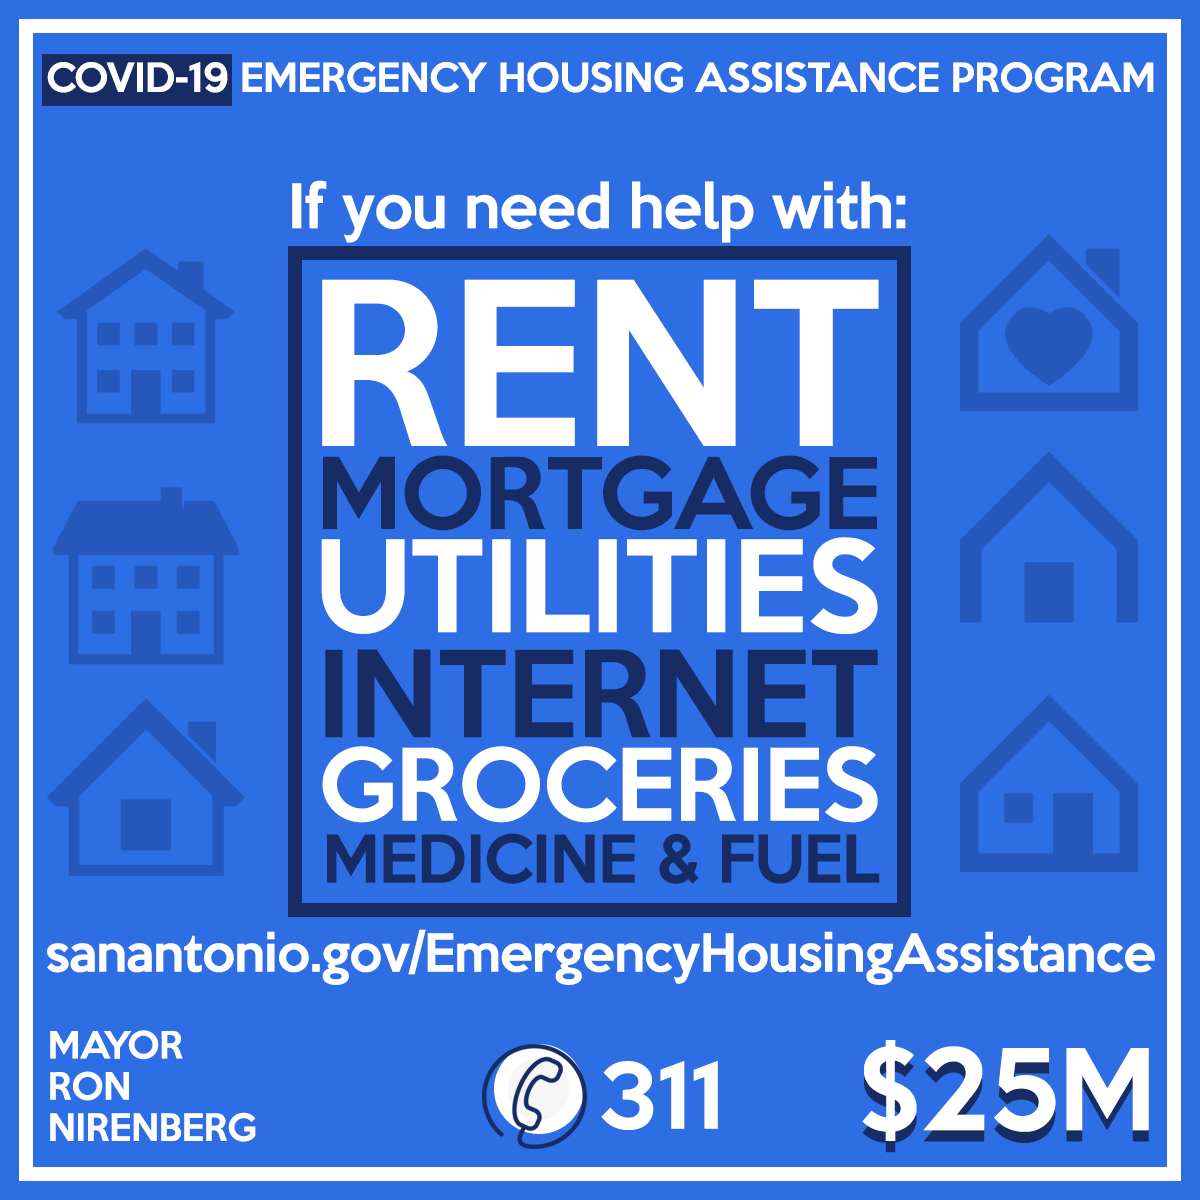 Council has approved the creation of a COVID-19 Emergency Housing Assistance Program, funded with $25 million from various sources.Residents seeking assistance should visit:  https://sanantonio.gov/EmergencyHousingAssistance or call 311Text HousingHelpSA to 41444 to donate to this fund.8/11